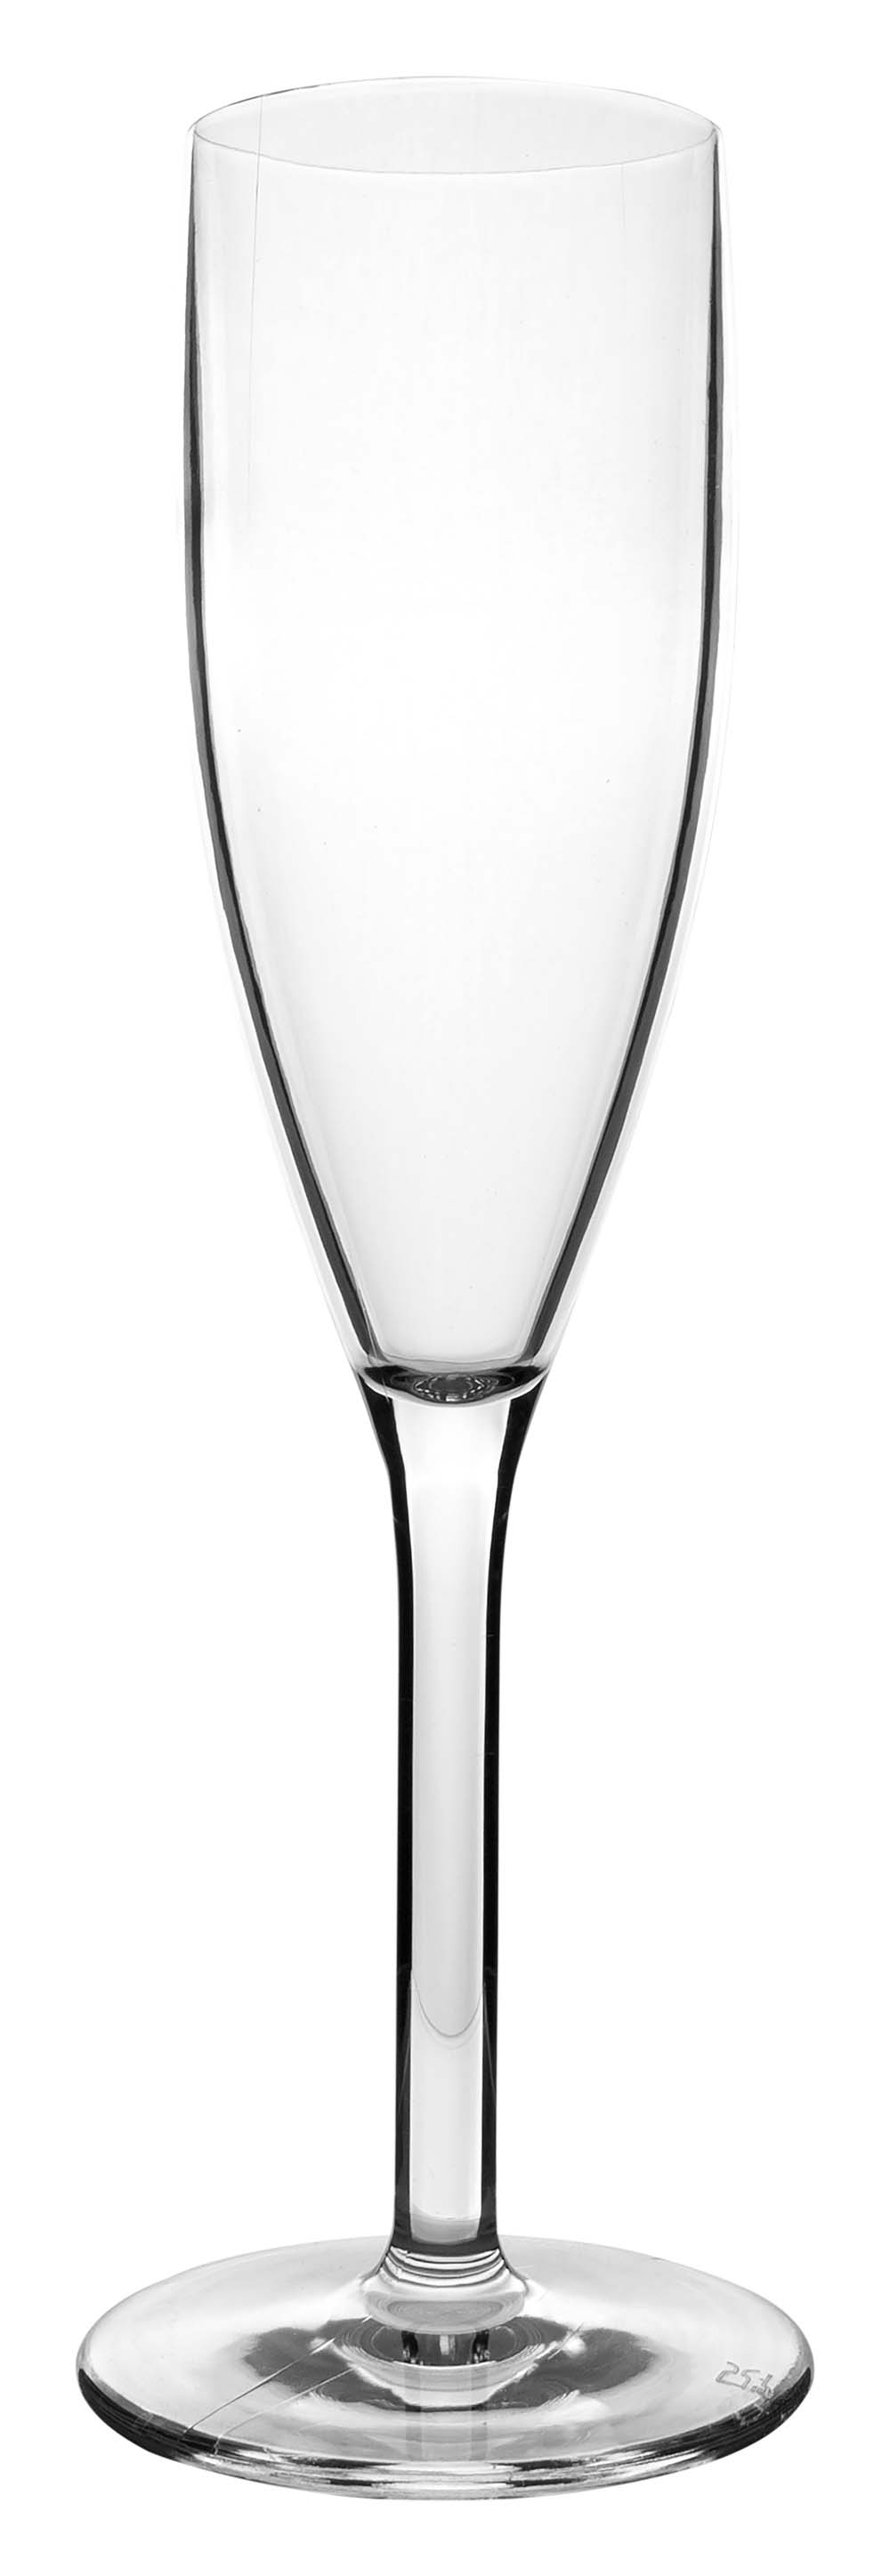 6101439 An extra sturdy and luxurious set of champagne glasses. Made of 100% polycarbonate This makes the glass almost unbreakable, light weight and scratch proof. The glasses are also dishwasher safe. Packed in units of 2.